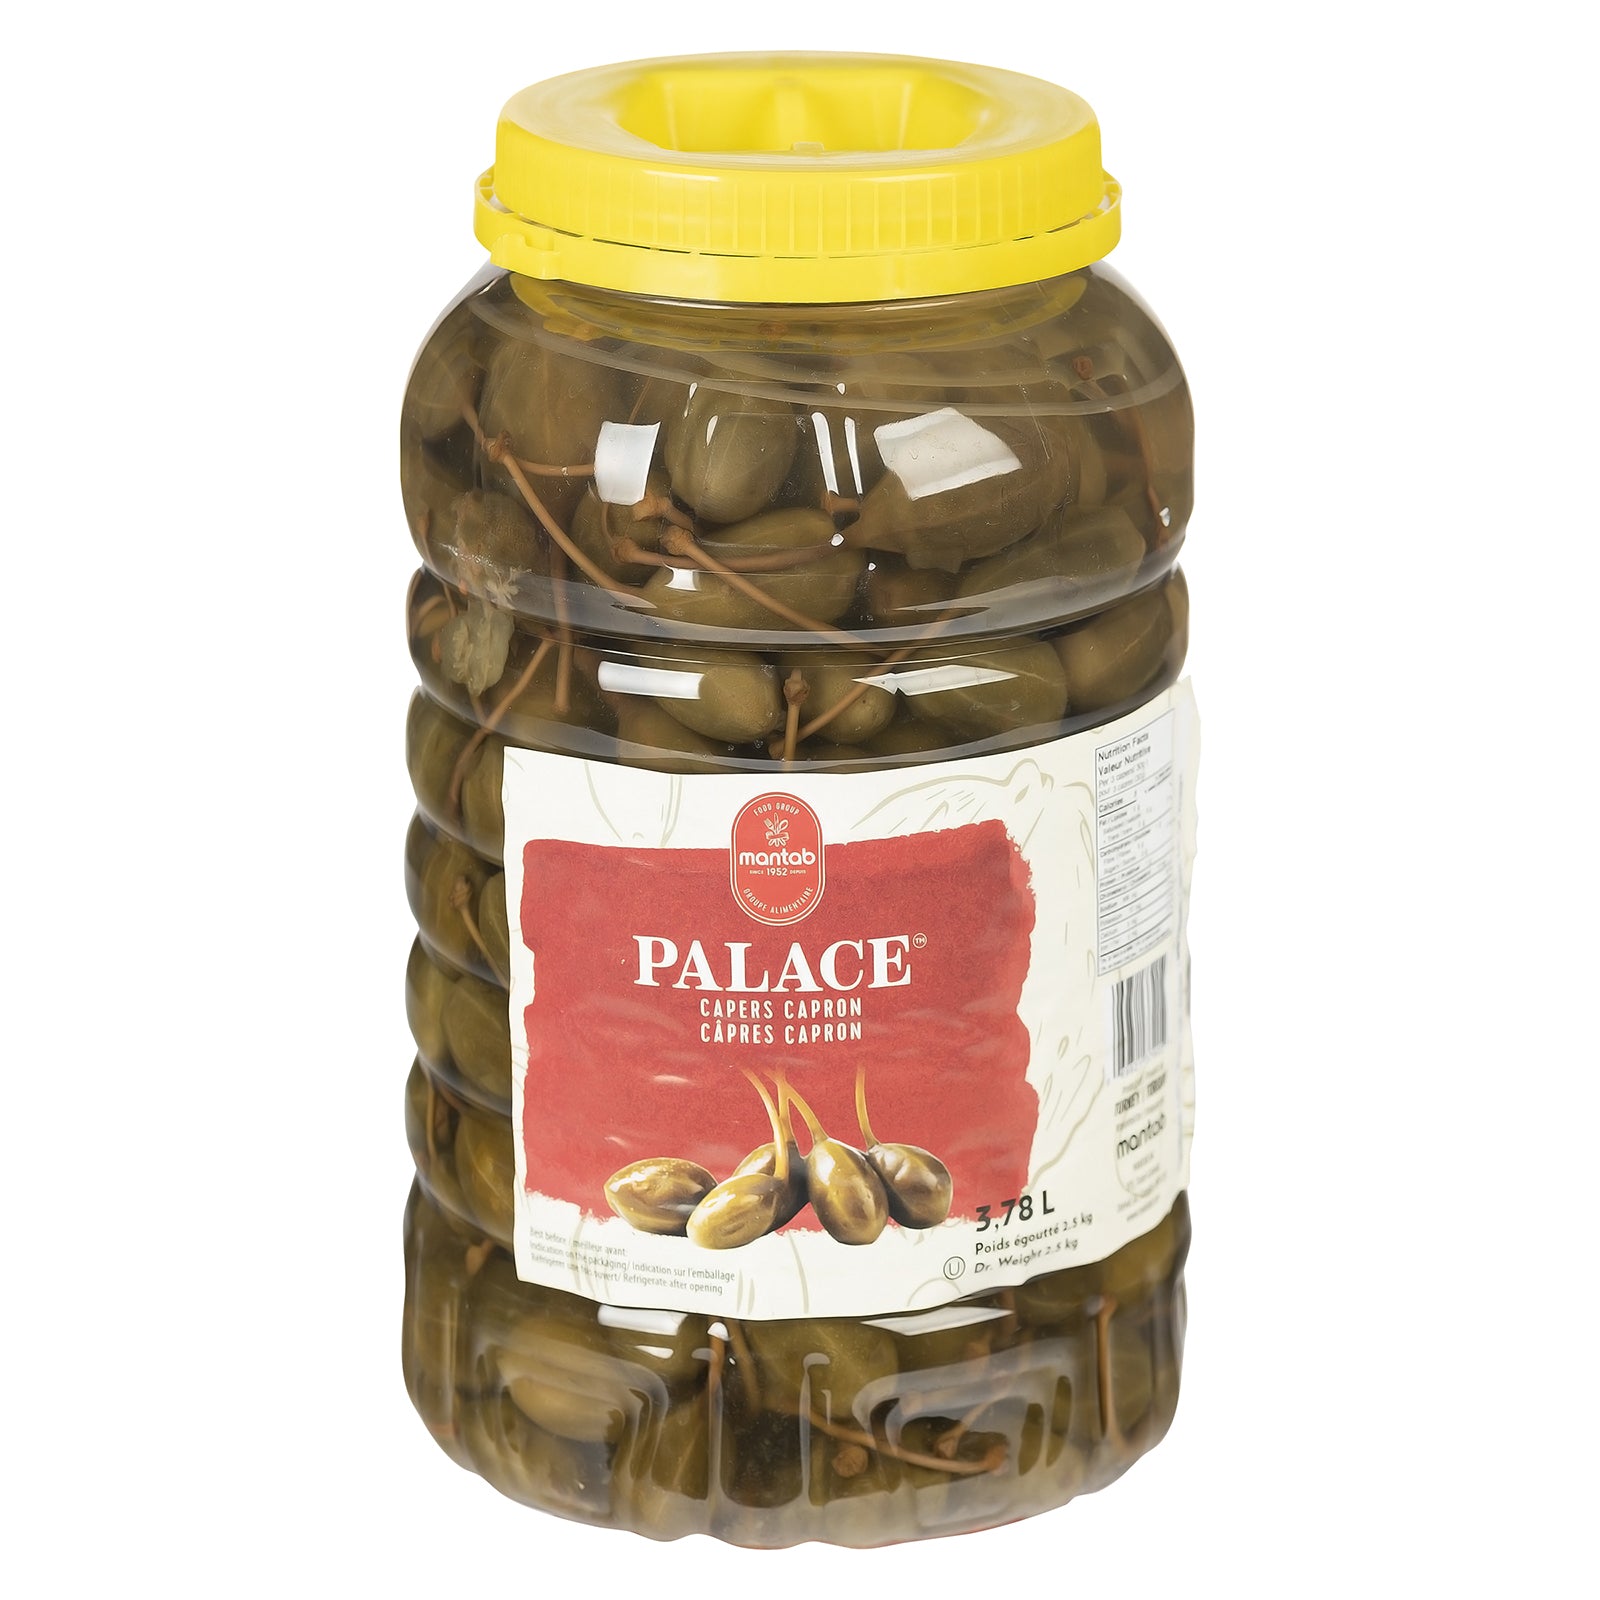 PALACE Capers Capron